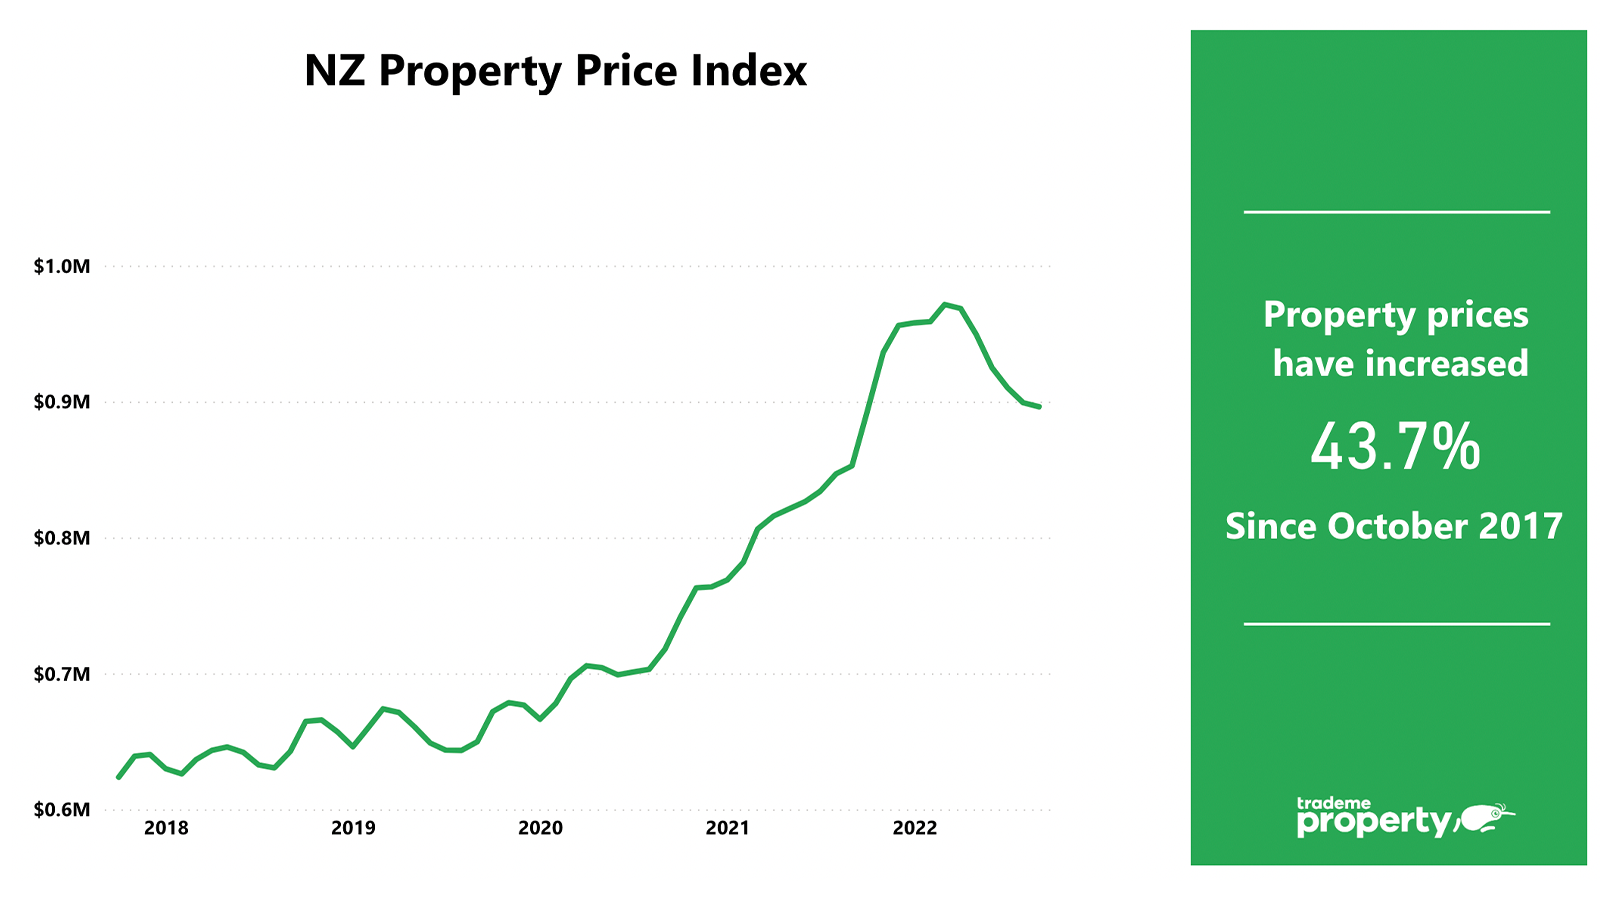 NZ Property Price Index since October 2017